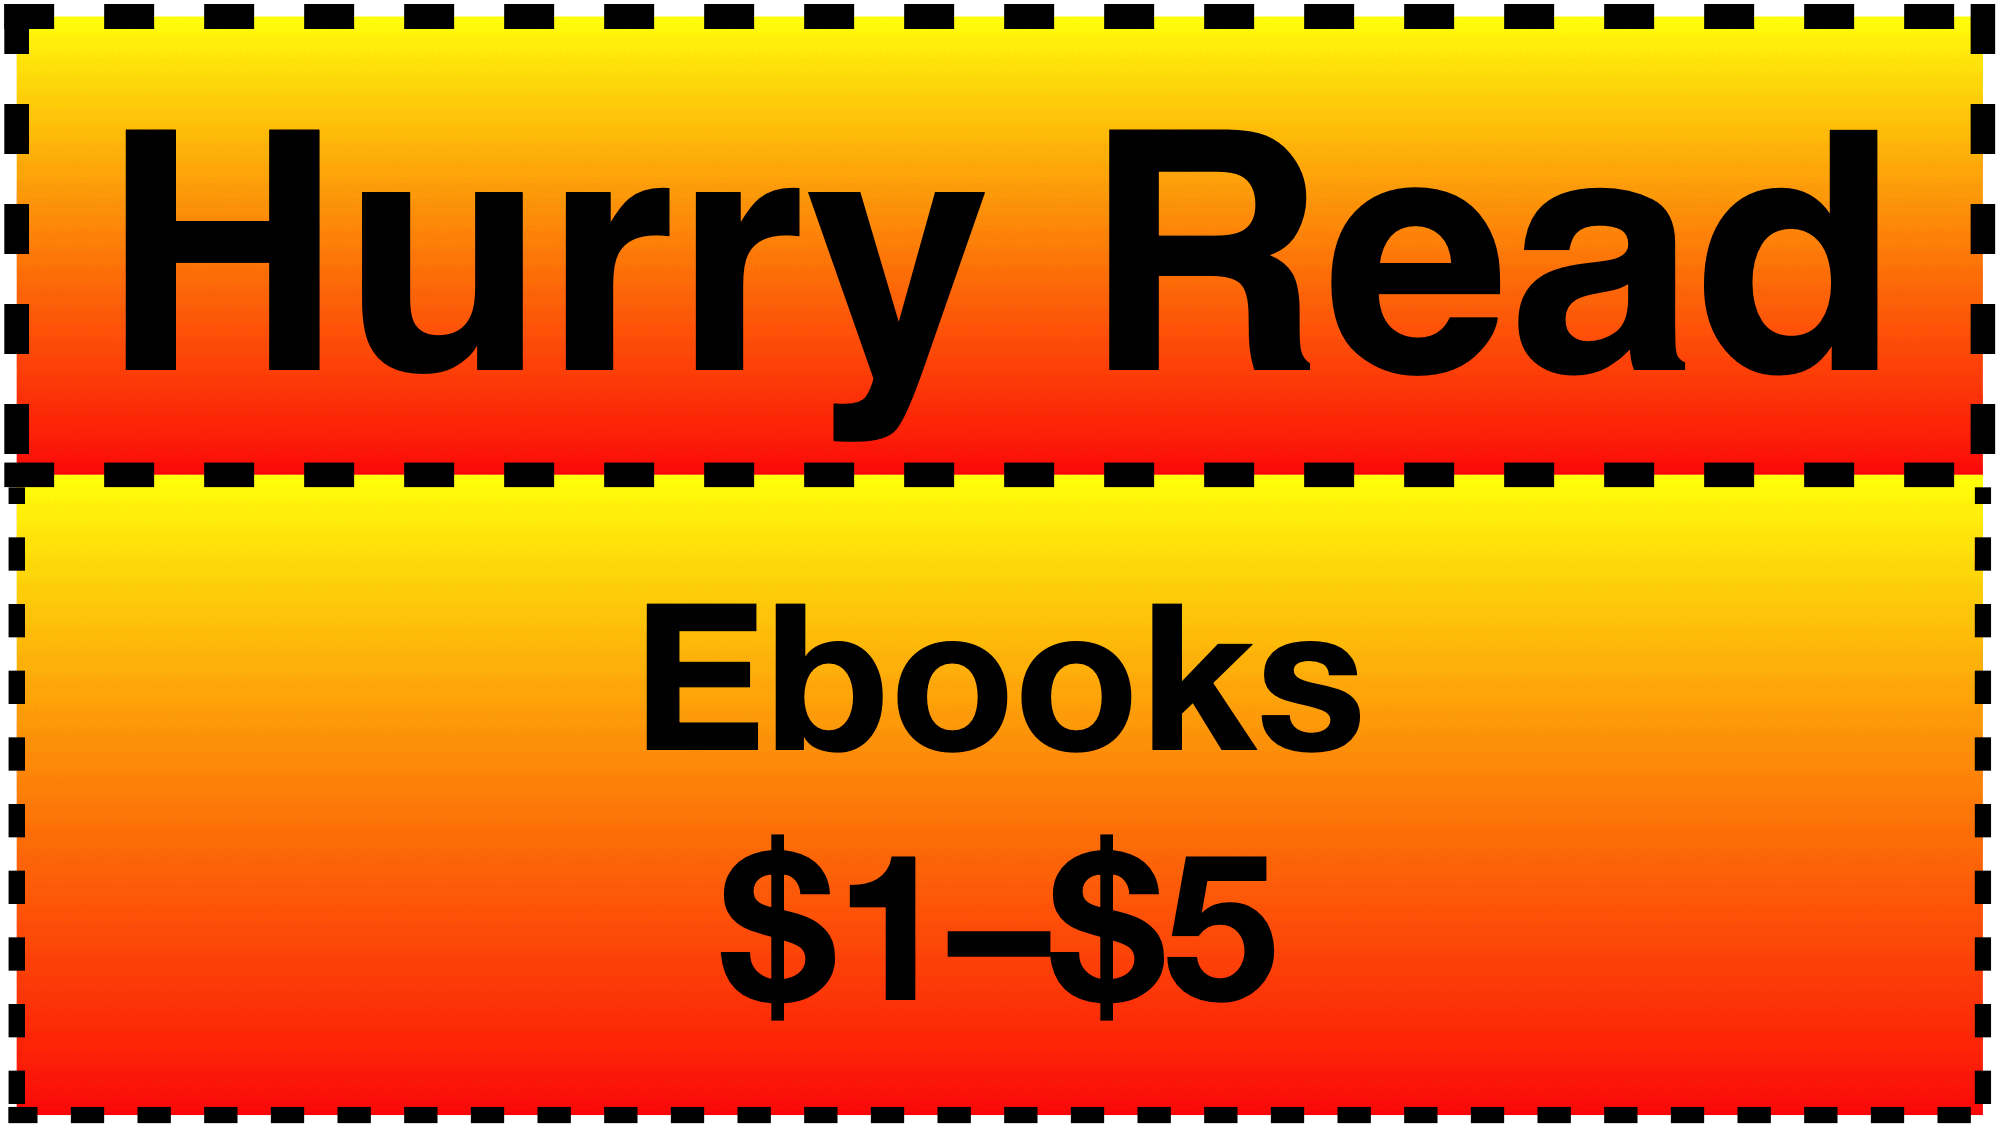 Hurry Read ebooks for $1 to $5